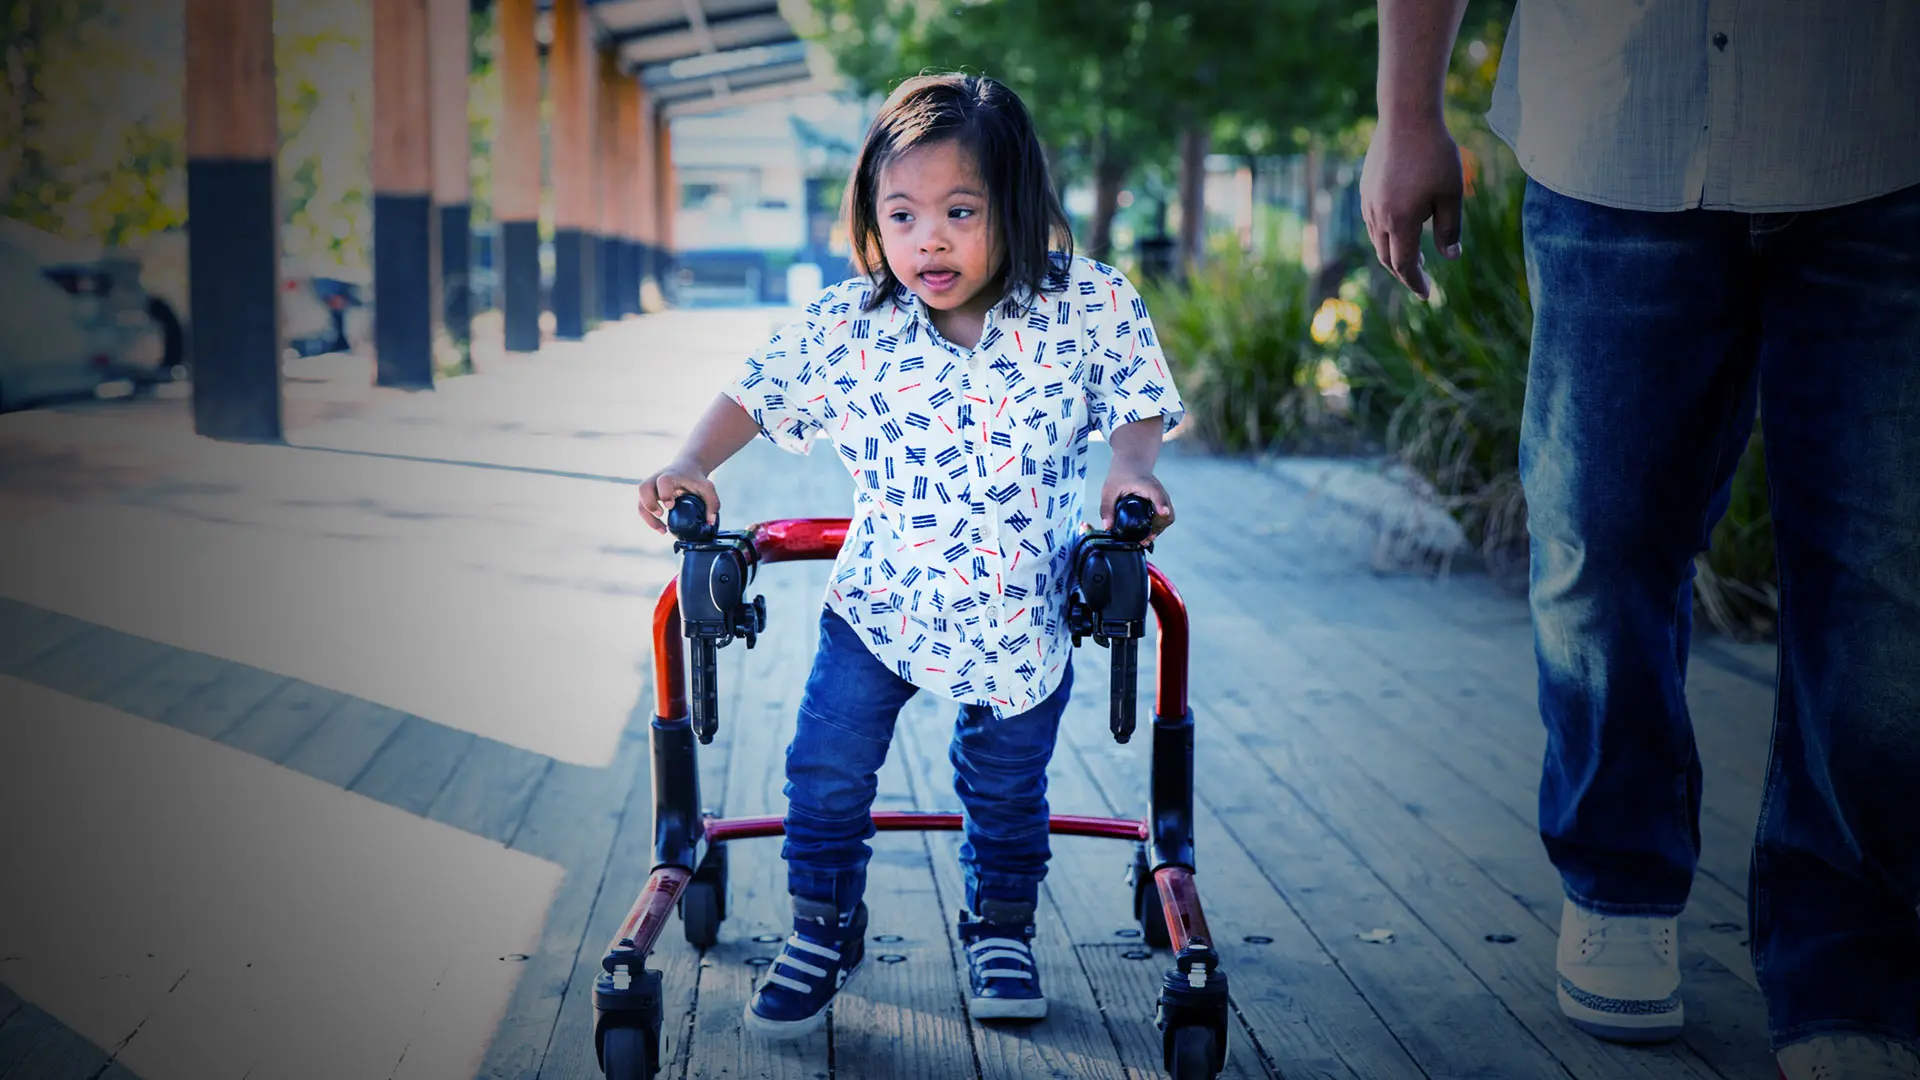 Orthopedists Offer “Go-To” Guidance for Managing Down Syndrome